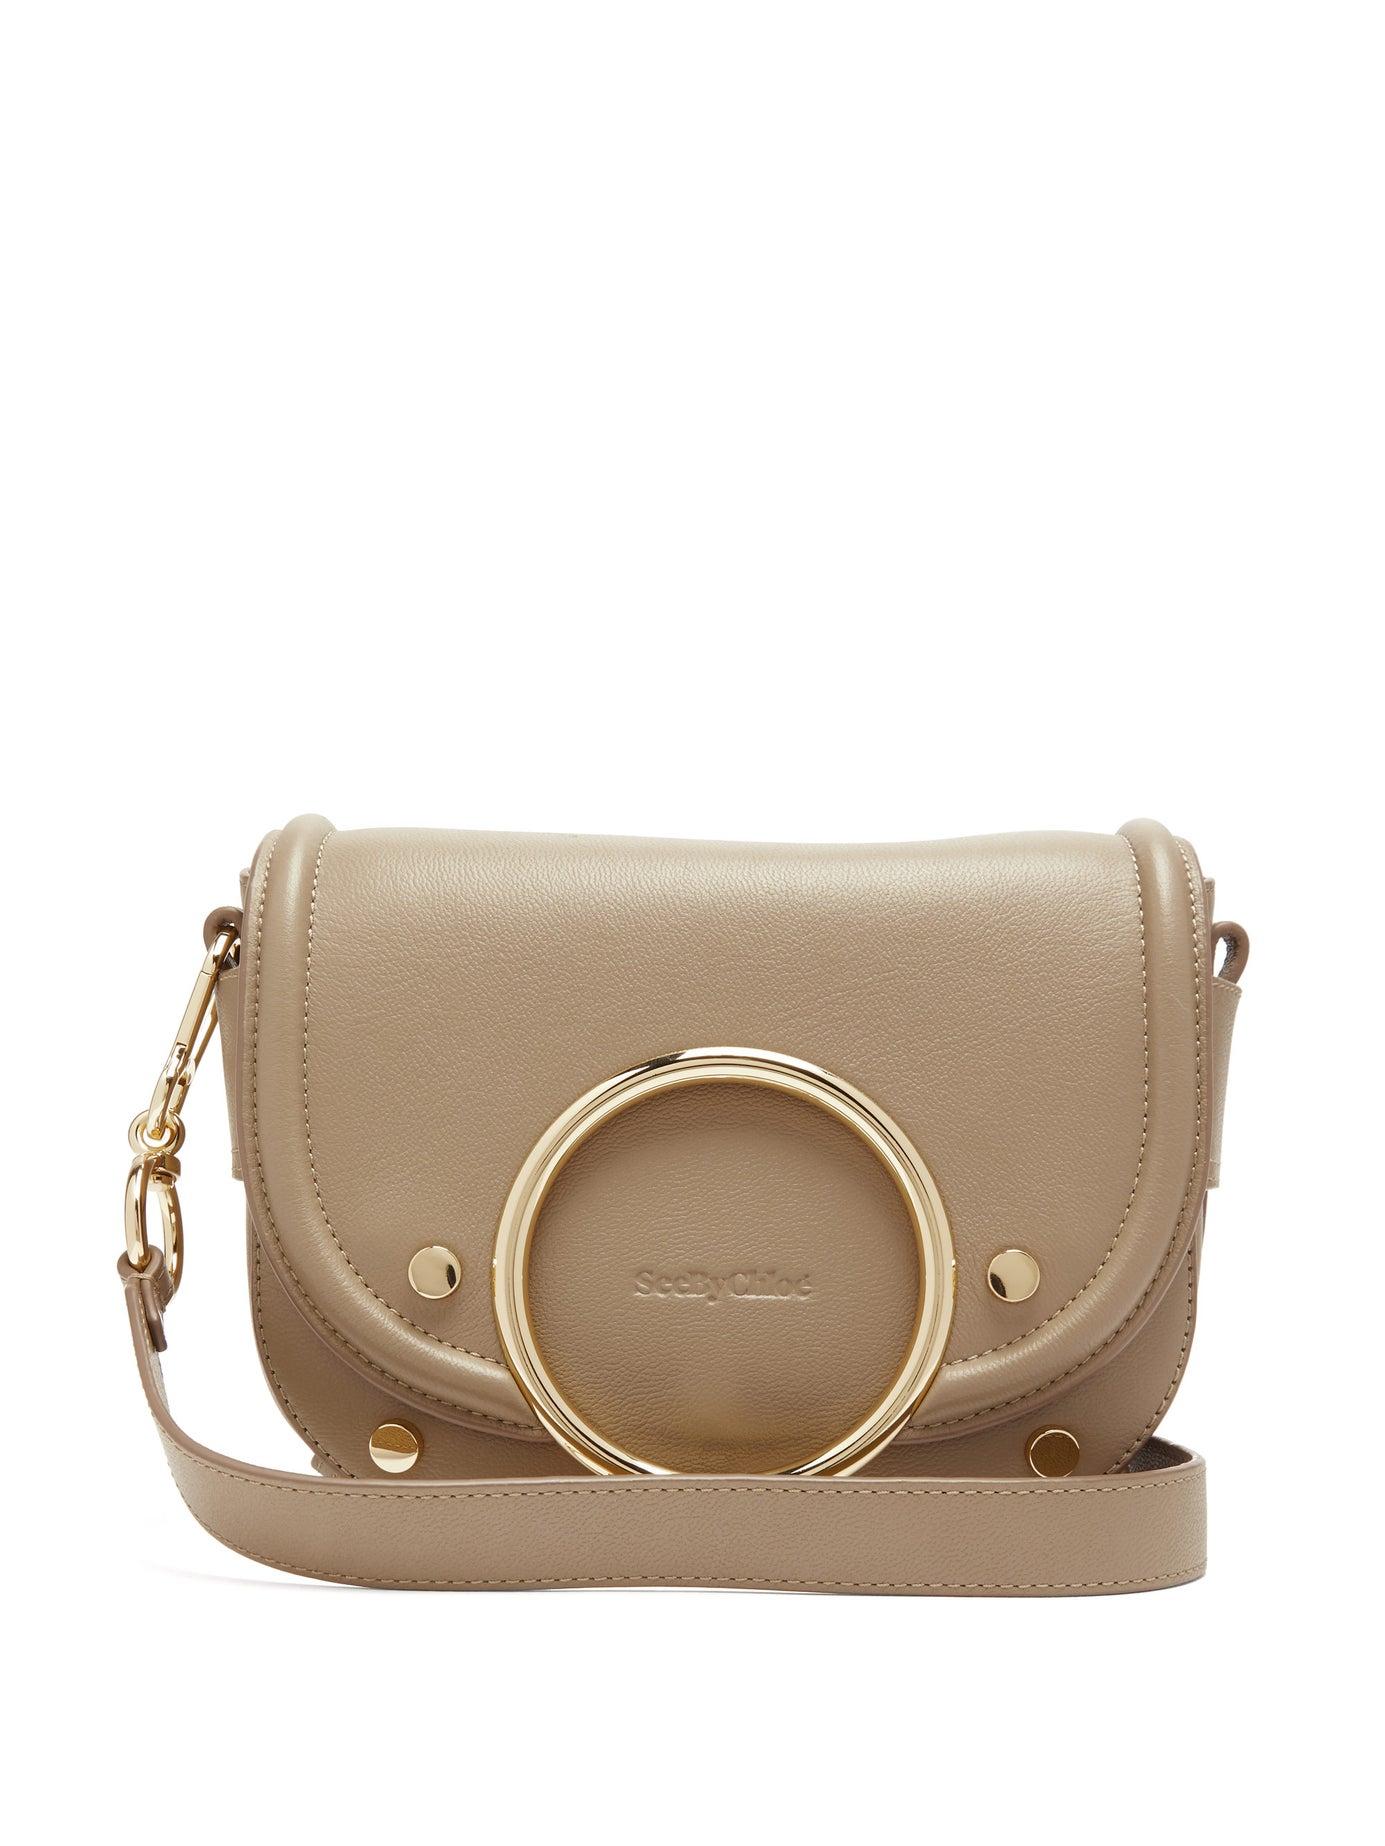 See By Chloé Mara Grained Leather Cross Body Bag in Grey (Gray) - Lyst